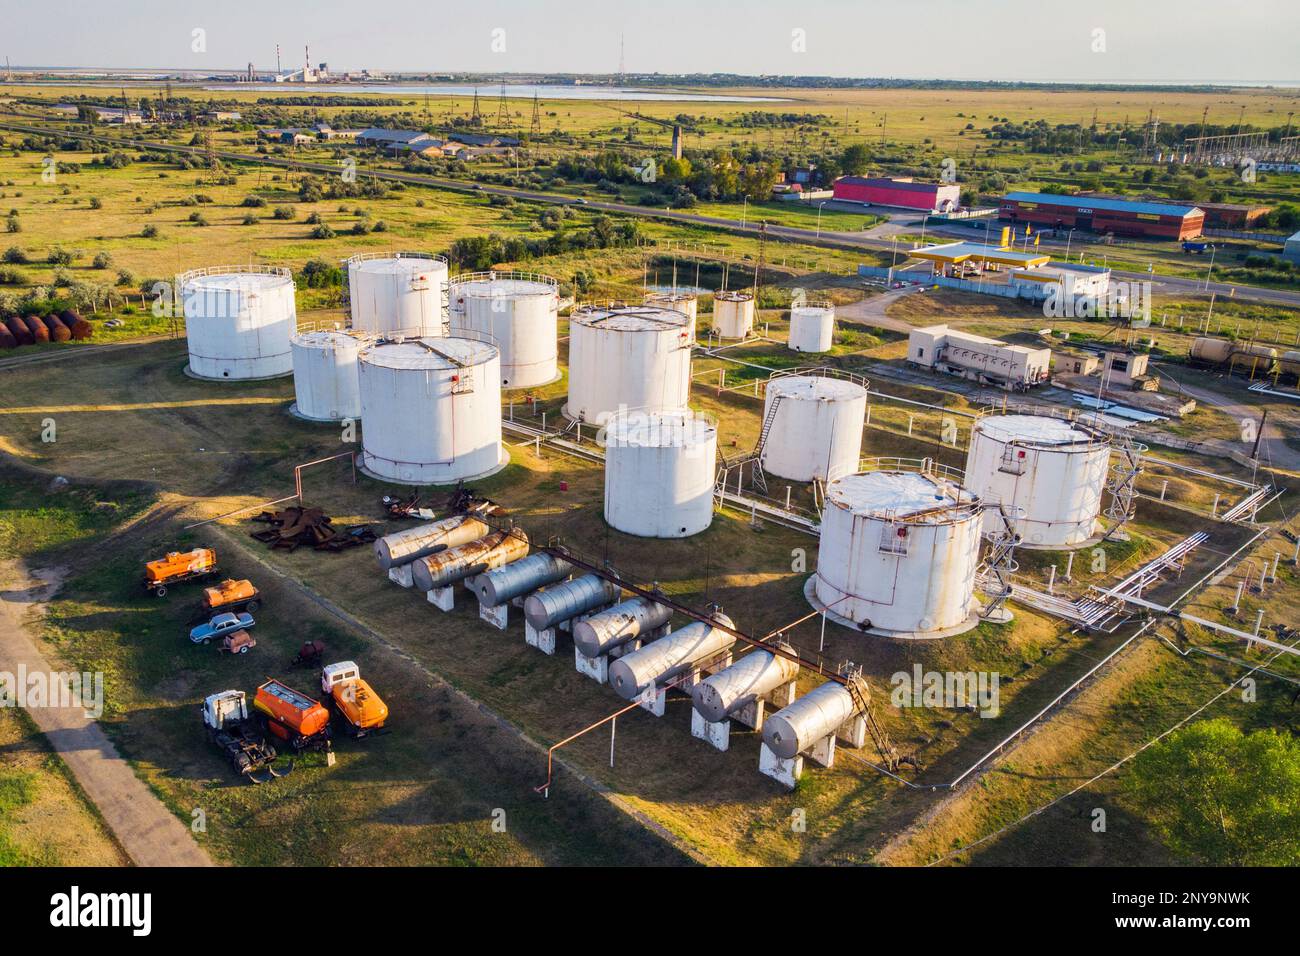 Fuel Storage Tank. Tanks with petroleum products are among the fields near the village. The view from the top. aerial view. Stock Photo